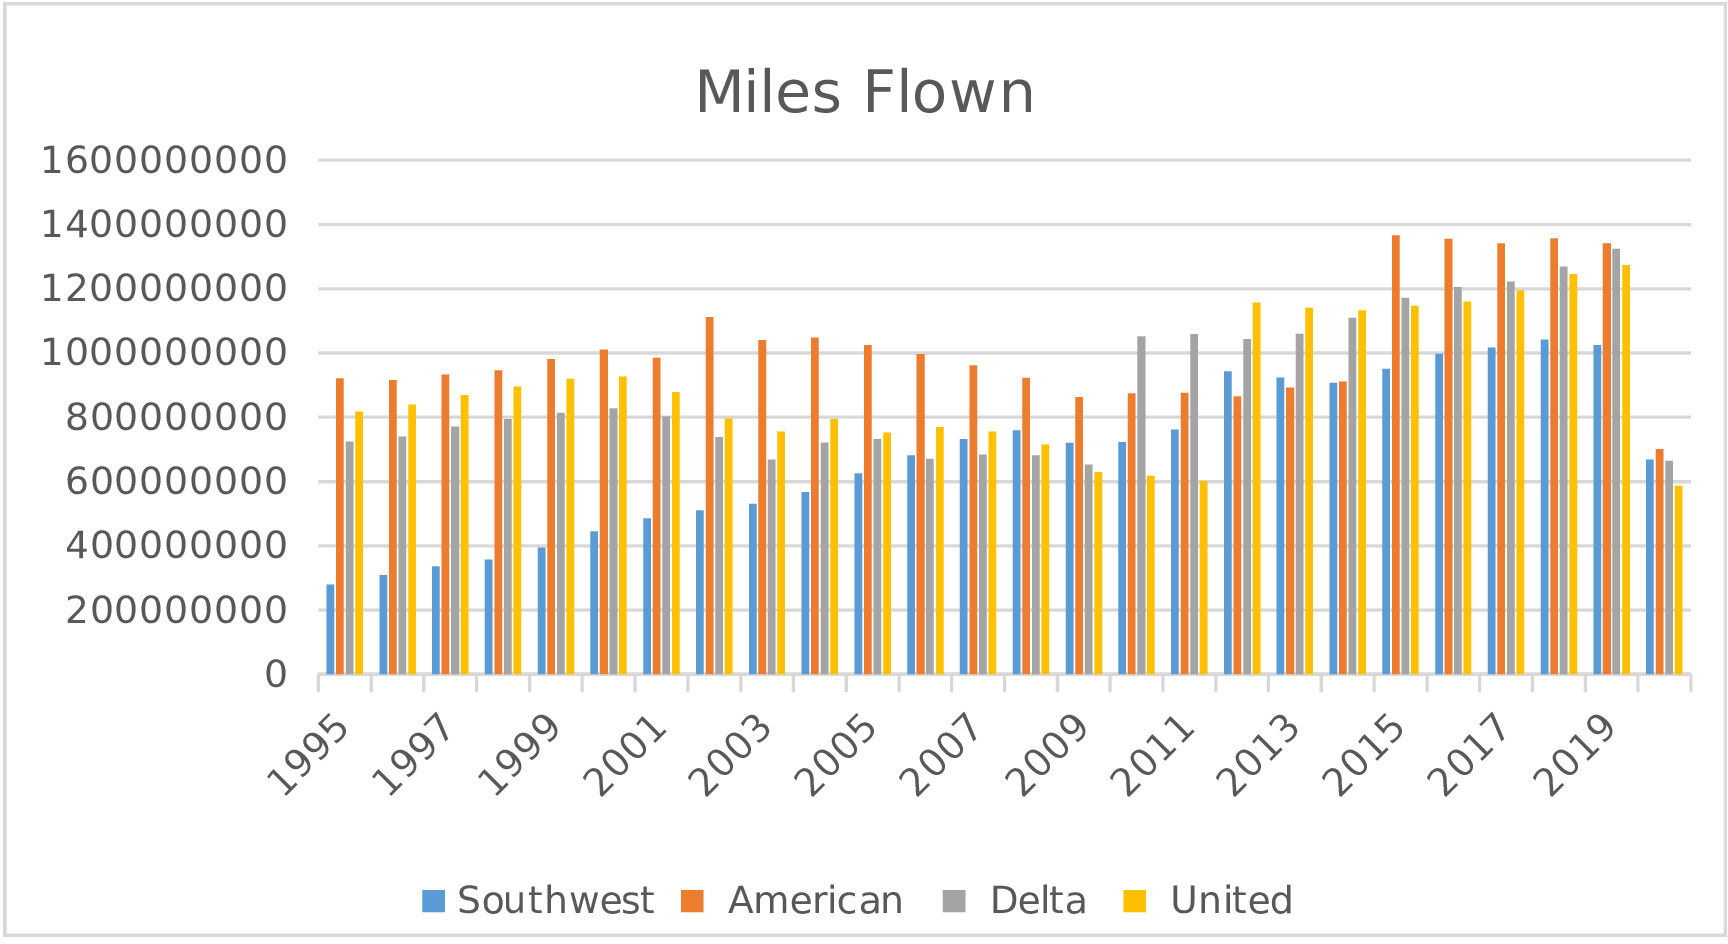 A line graph shows a comparison of the miles flown from 1995 to 2020.